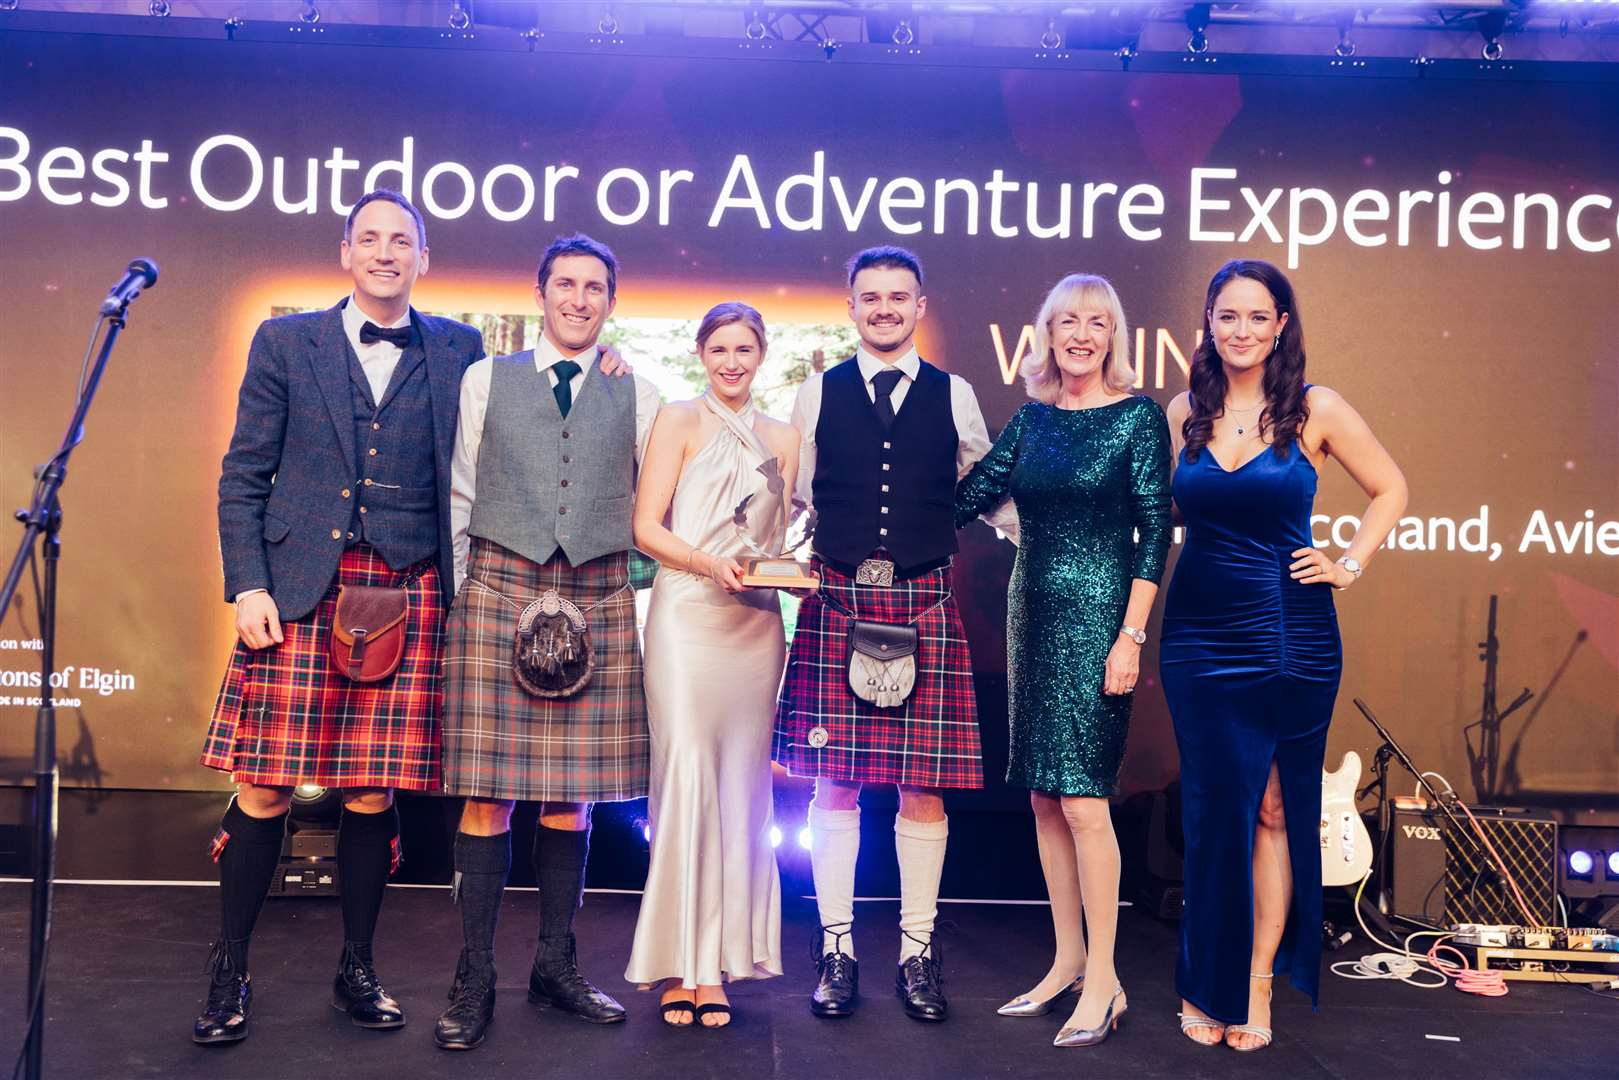 Gary Innes, Ben Thorburn, Emily Schaschke and Arran Goddard from Wilderness Scotland, Best Outdoor or Adventure Experience award winner, with Anne Anderson, VisitScotland board member and presenter Jennifer Reoch. Picture: Connor Mollison